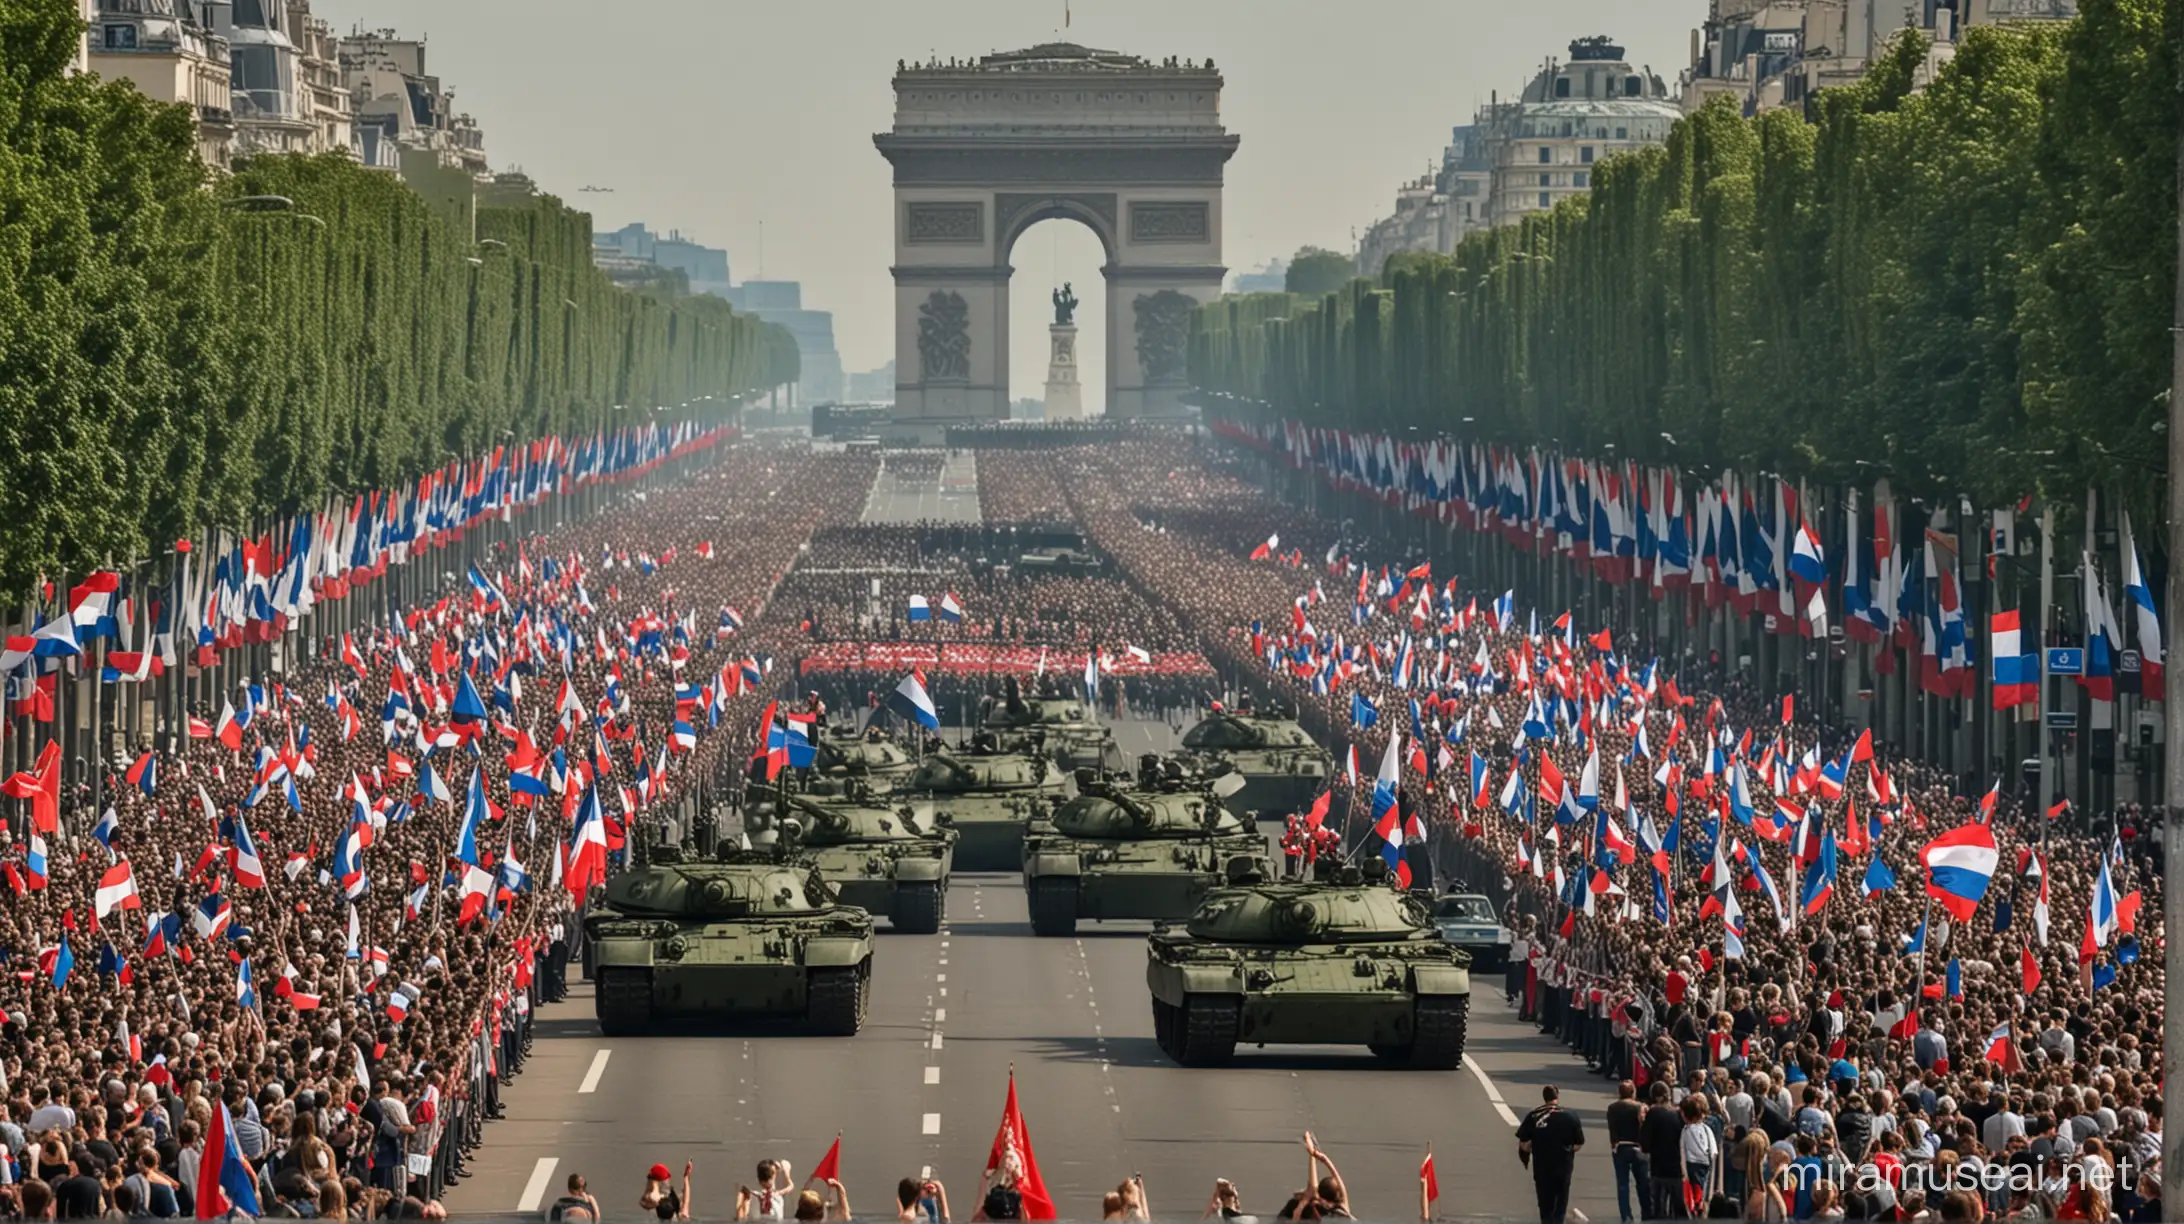 Russian Tank Parade on Champslyses with Celebratory Crowd